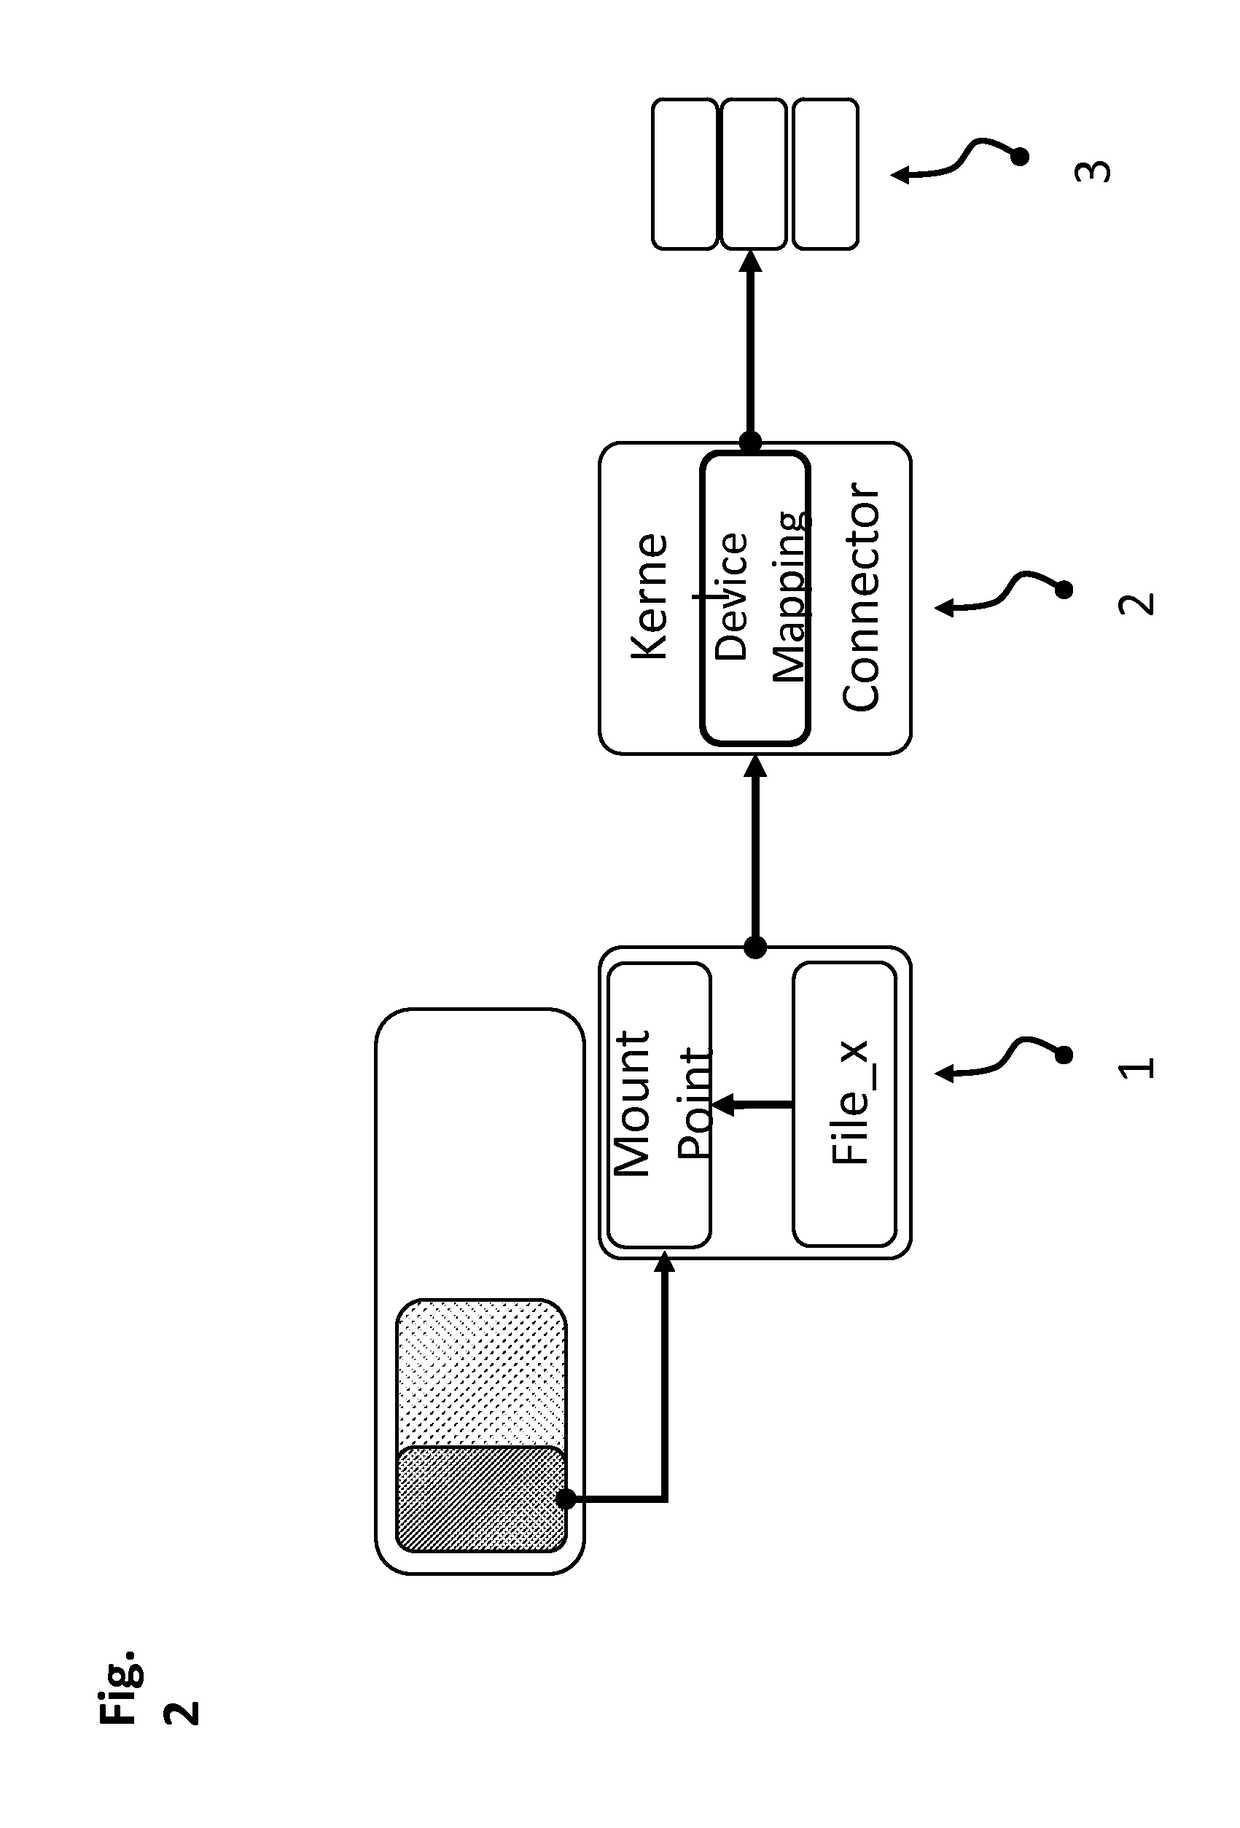 Scale Out Storage Architecture for In-Memory Computing and Related Method for Storing Multiple Petabytes of Data Entirely in System RAM Memory